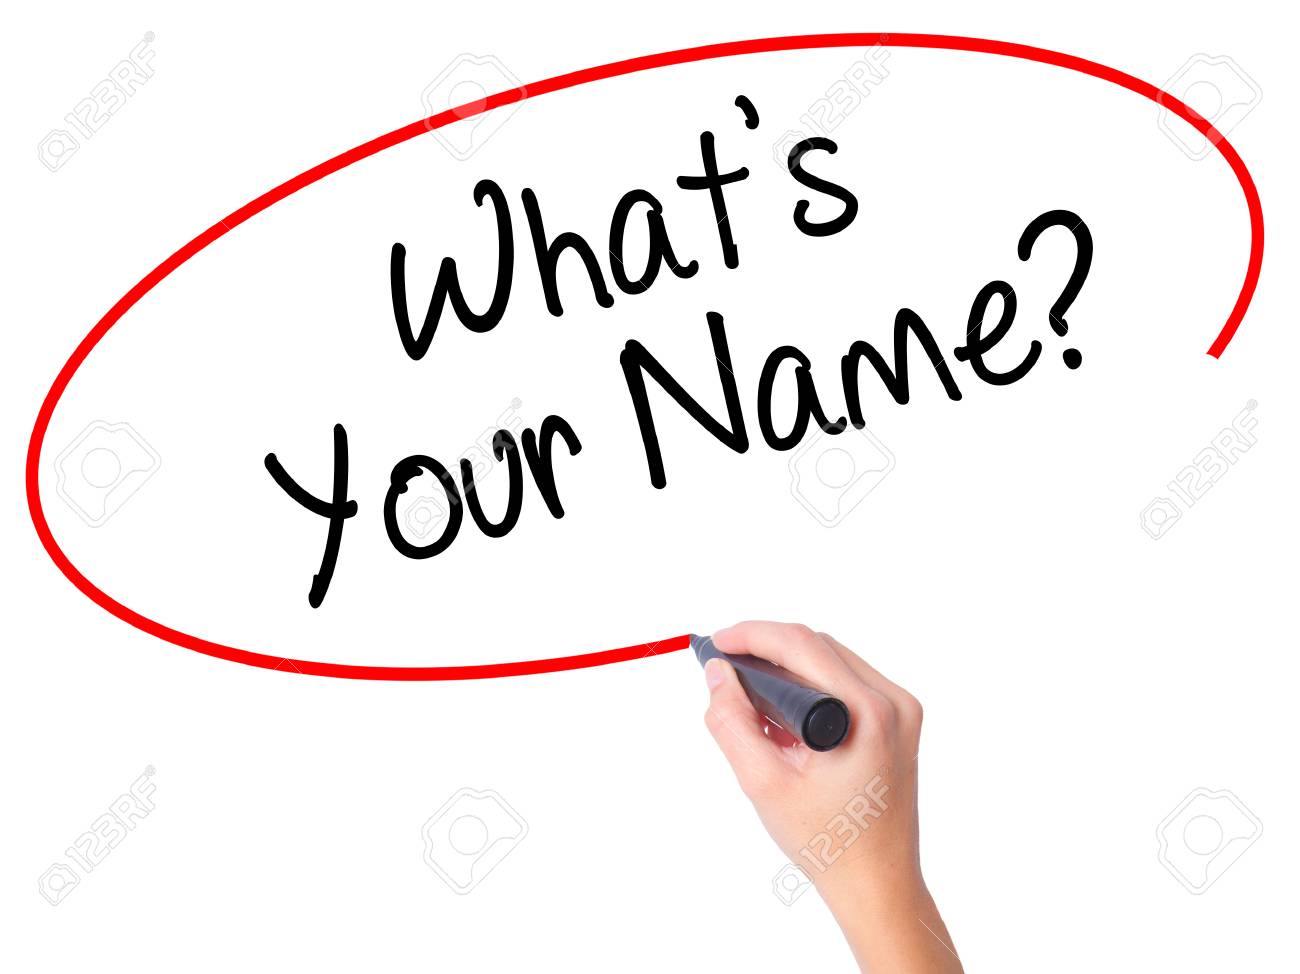 I love you responses  - what's your name - e What's Your Name? @ 123RF 123RF